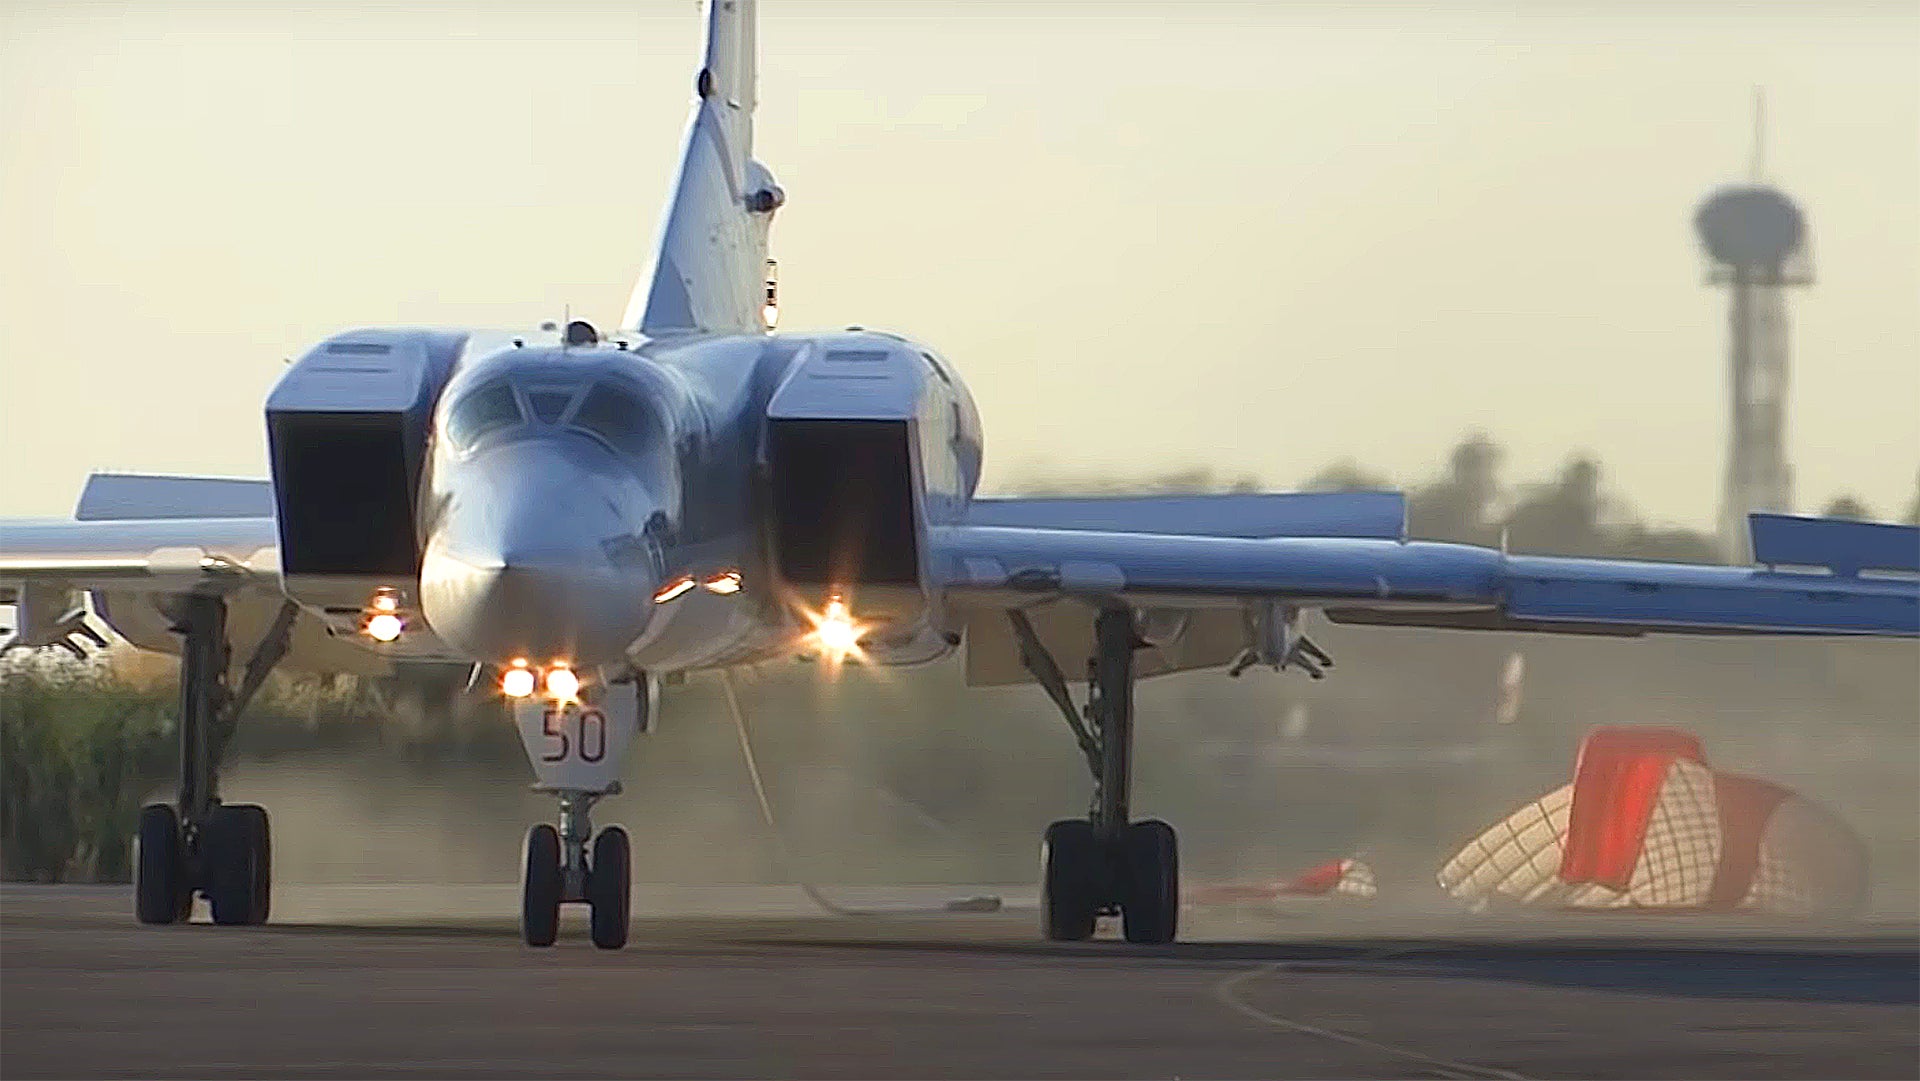 Russia claims Ukraine plotted to steal one of its Tu-22M Backfire bombers.